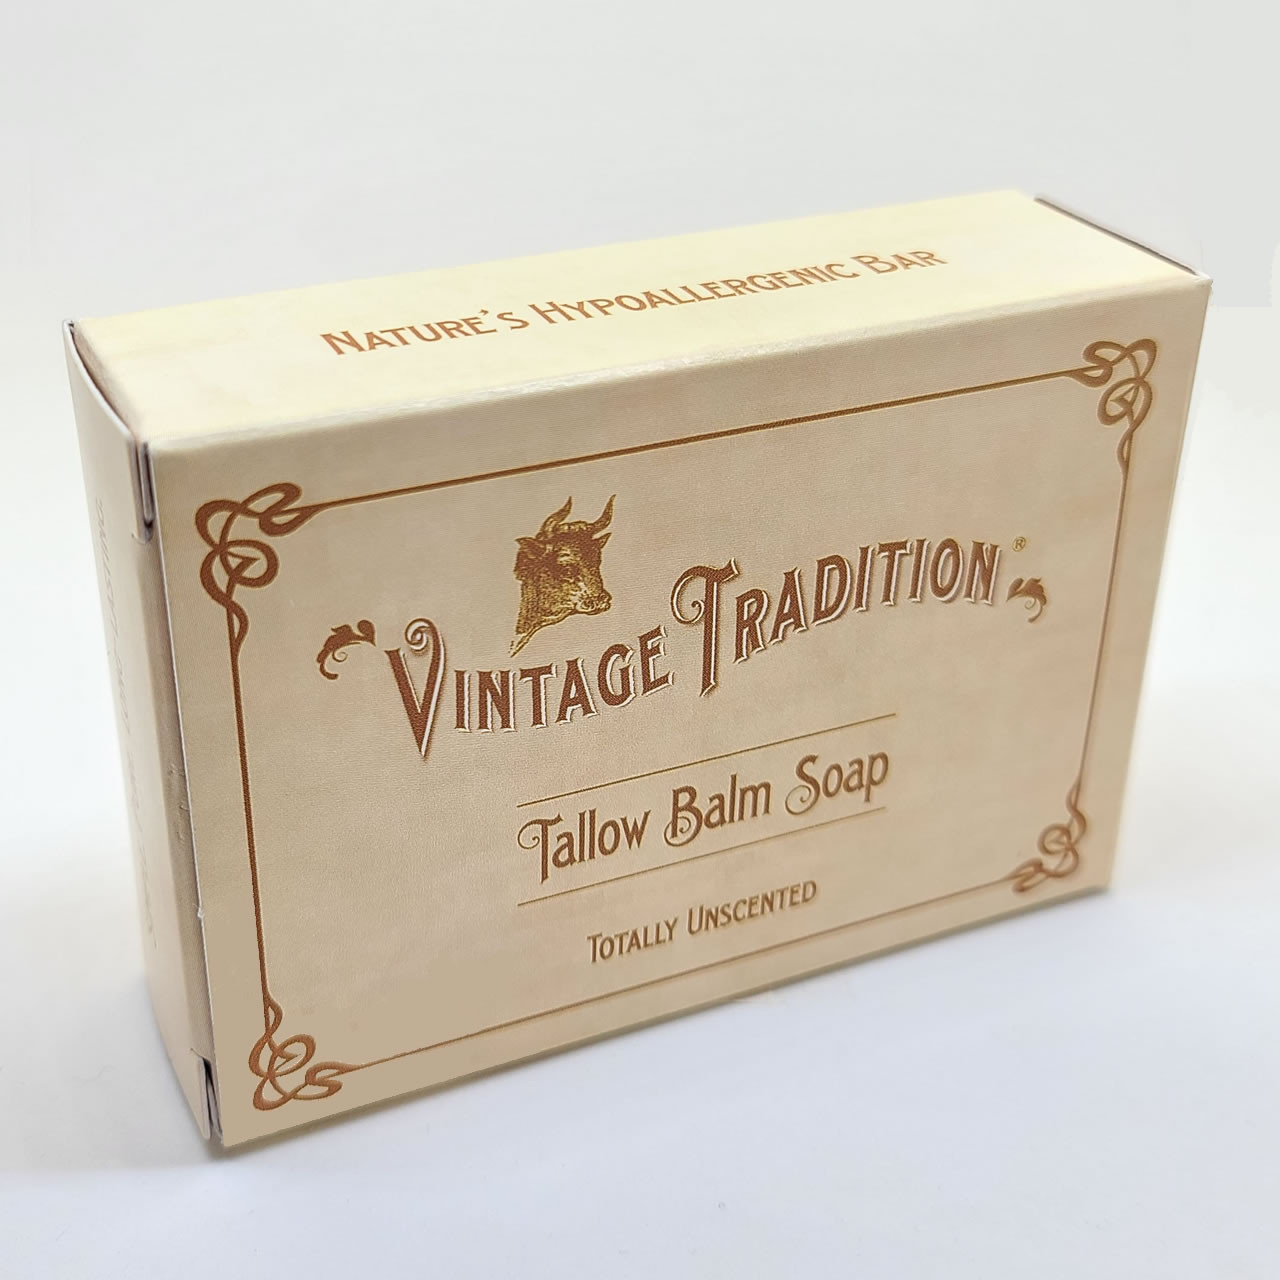 Vintage Tradition Totally Unscented Tallow Balm Soap